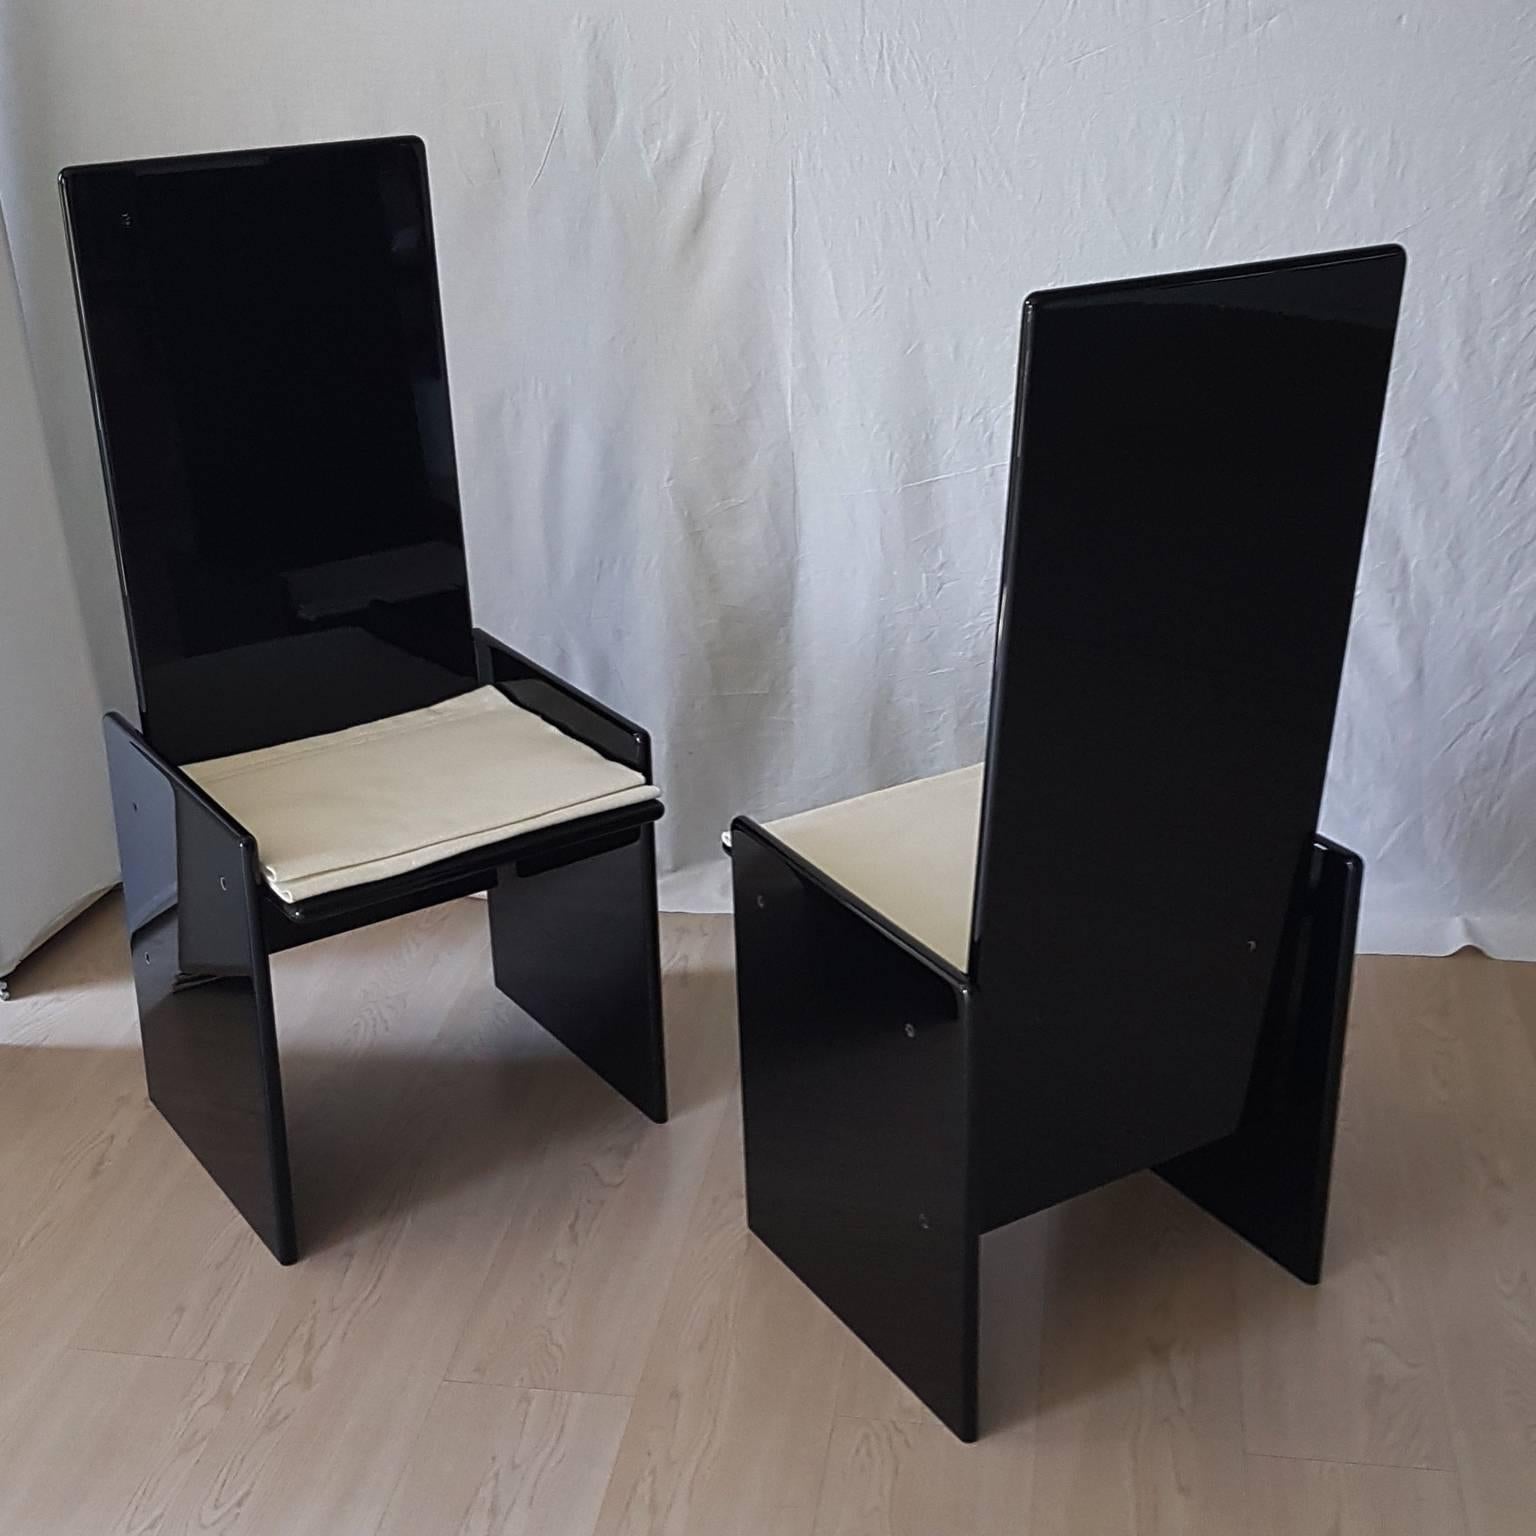 Lacquered Pair of Vintage Black Chairs by Kazuhide Takahama for Simon, Late 20th Century